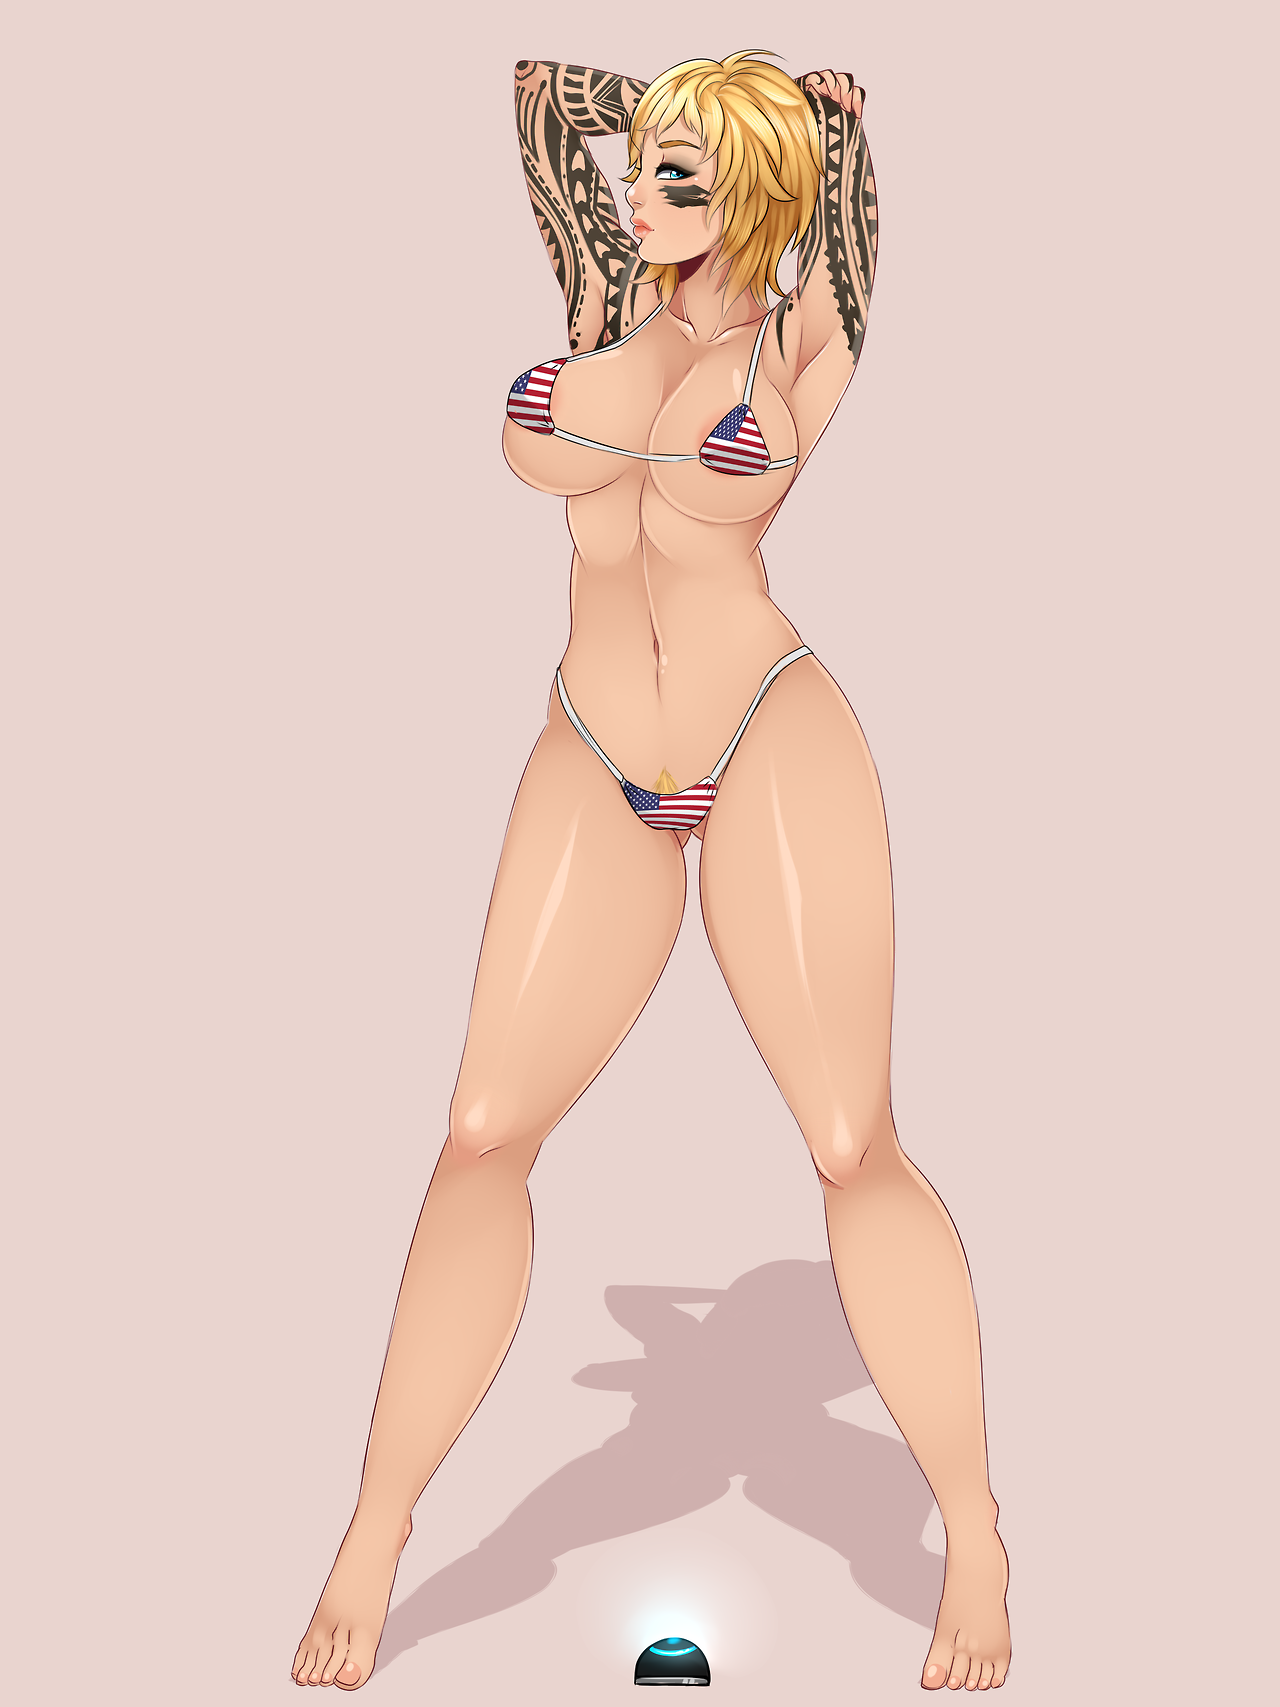 law-zilla:  Promised. Valkyrie reached  400 notes and here’s her U.S.A microbikini